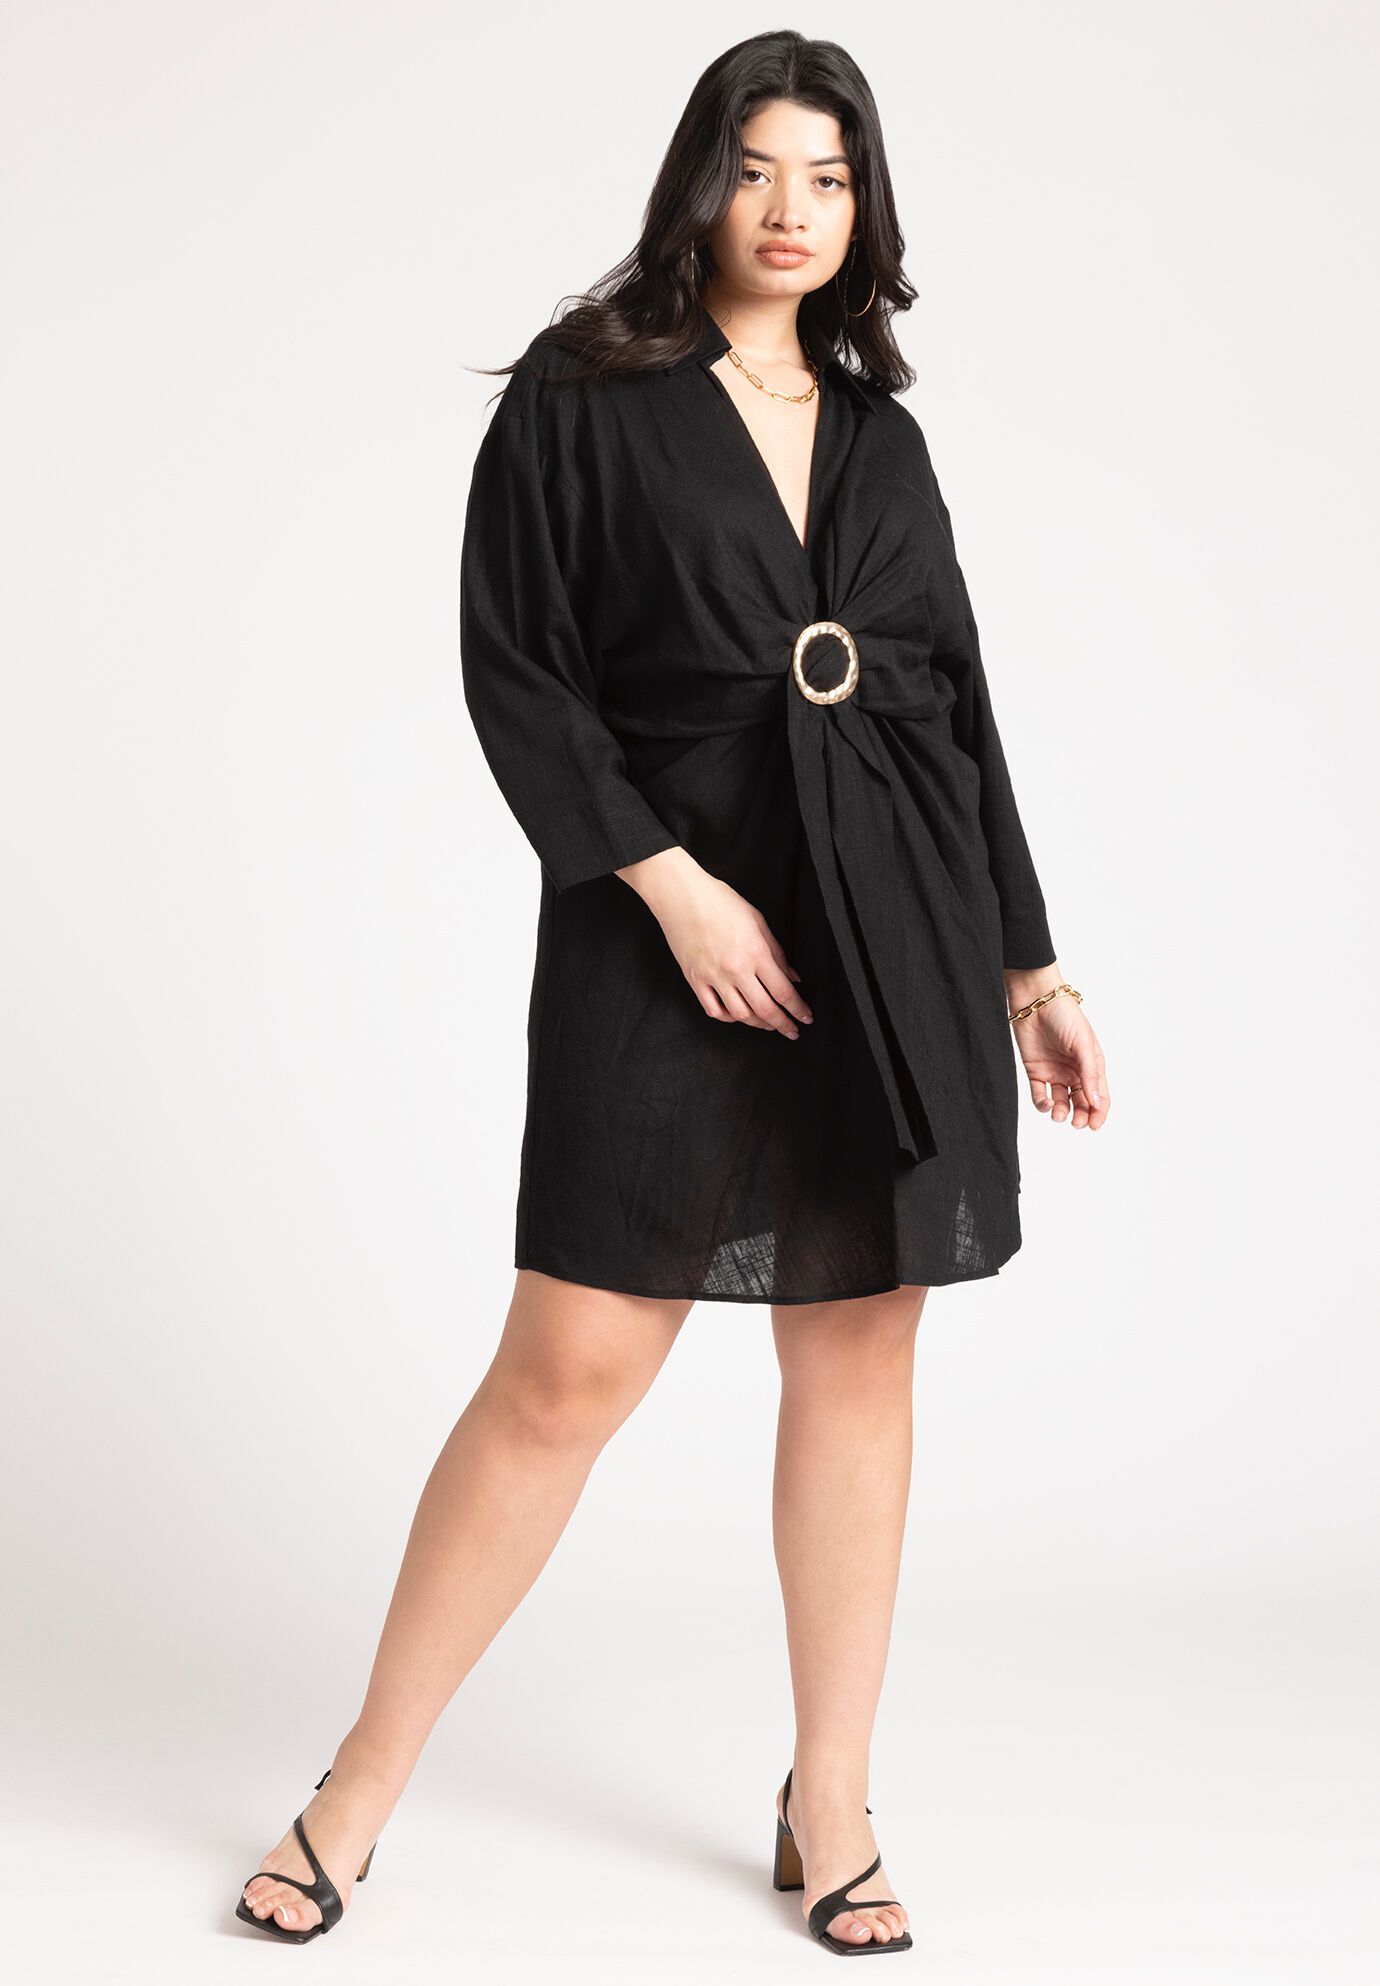 Plus Size Dolman Long Sleeves Collared Short Cover Up/Tunic